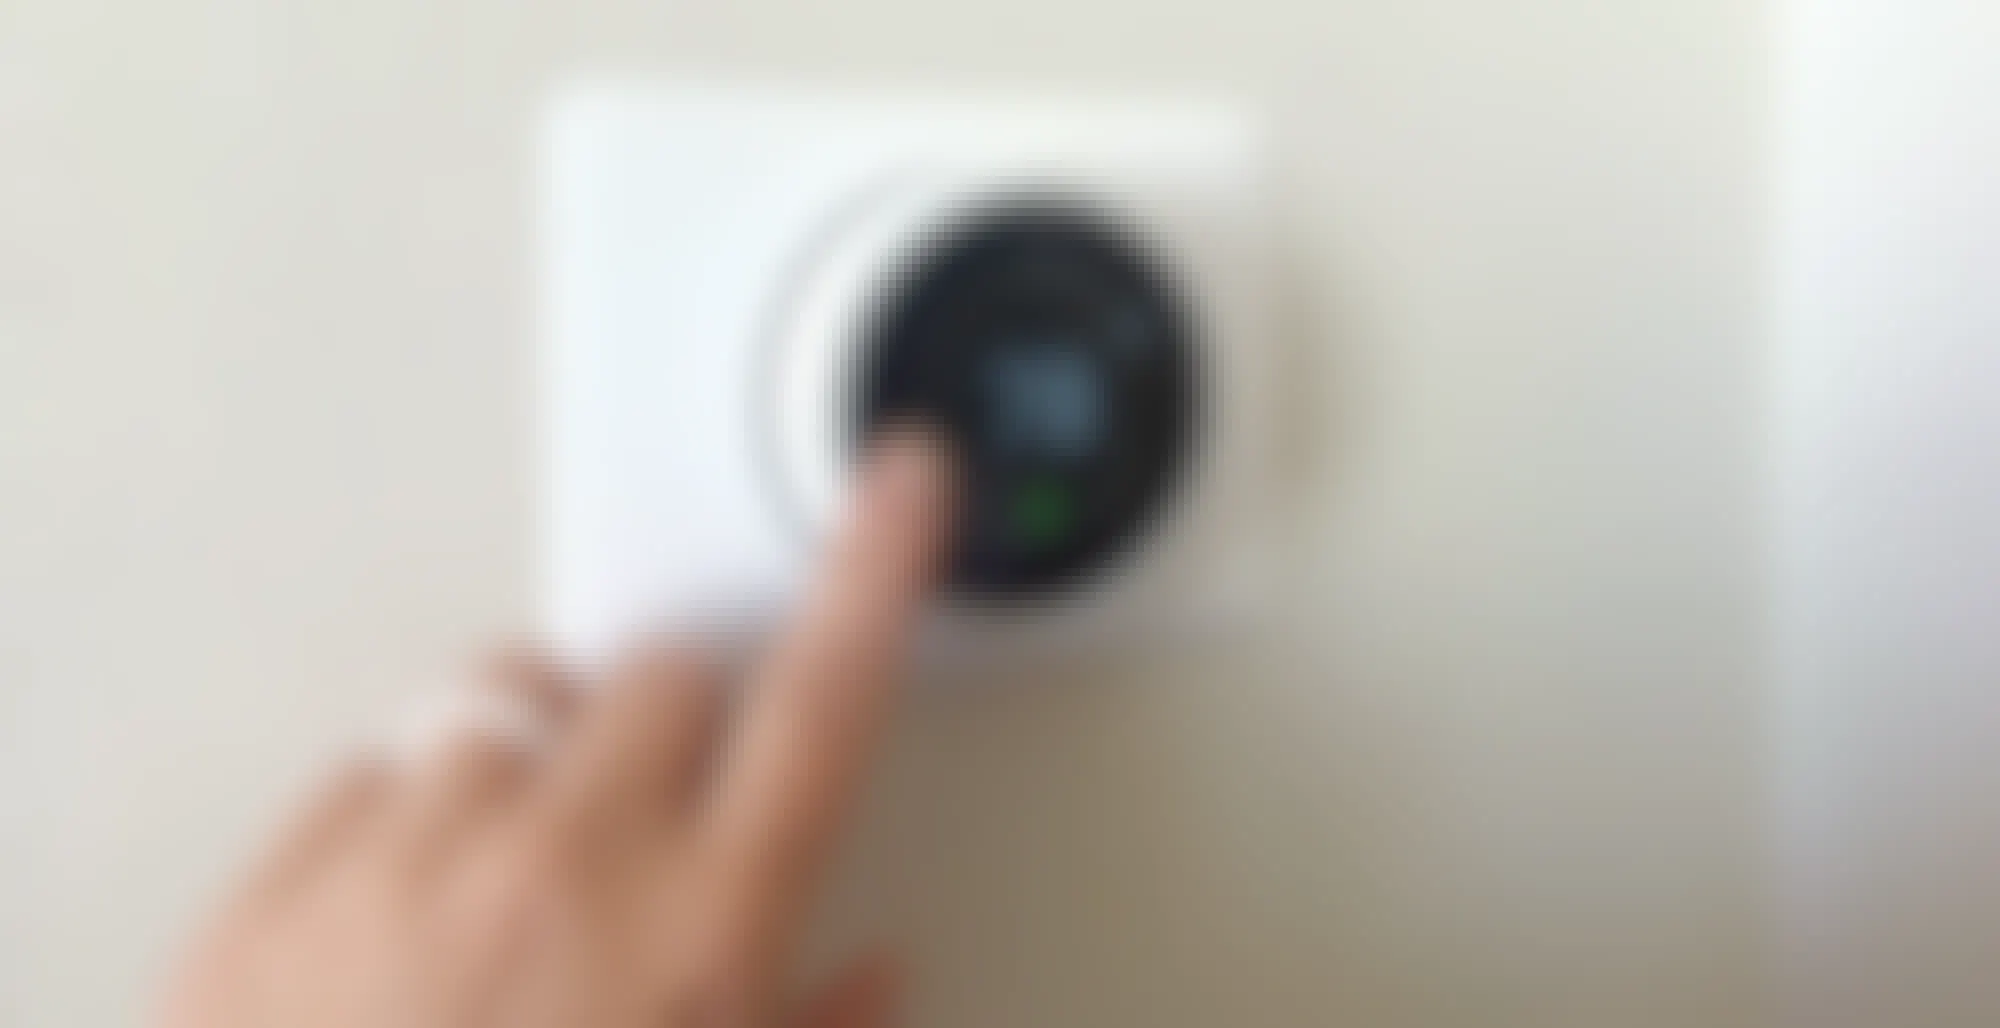 How to Get a Free Thermostat, LED Bulbs, Power Strips and More From Your Utility Company